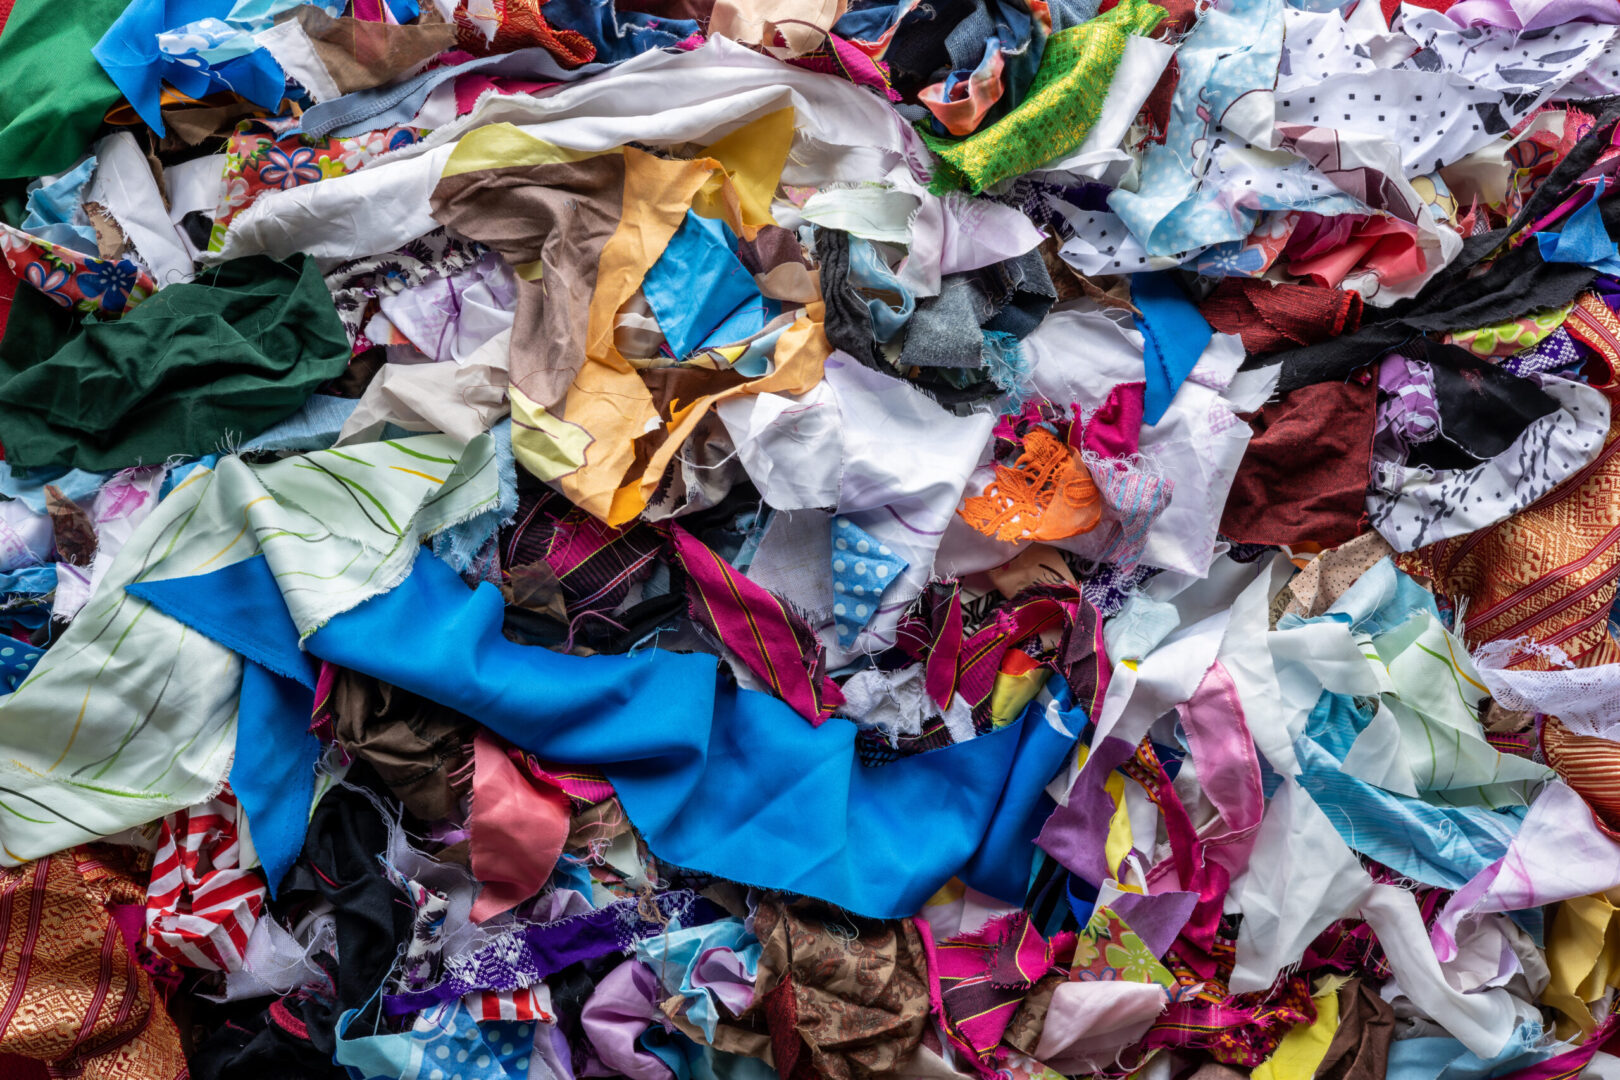 Image shows a pile of textile waste, with rag pieces of different colors